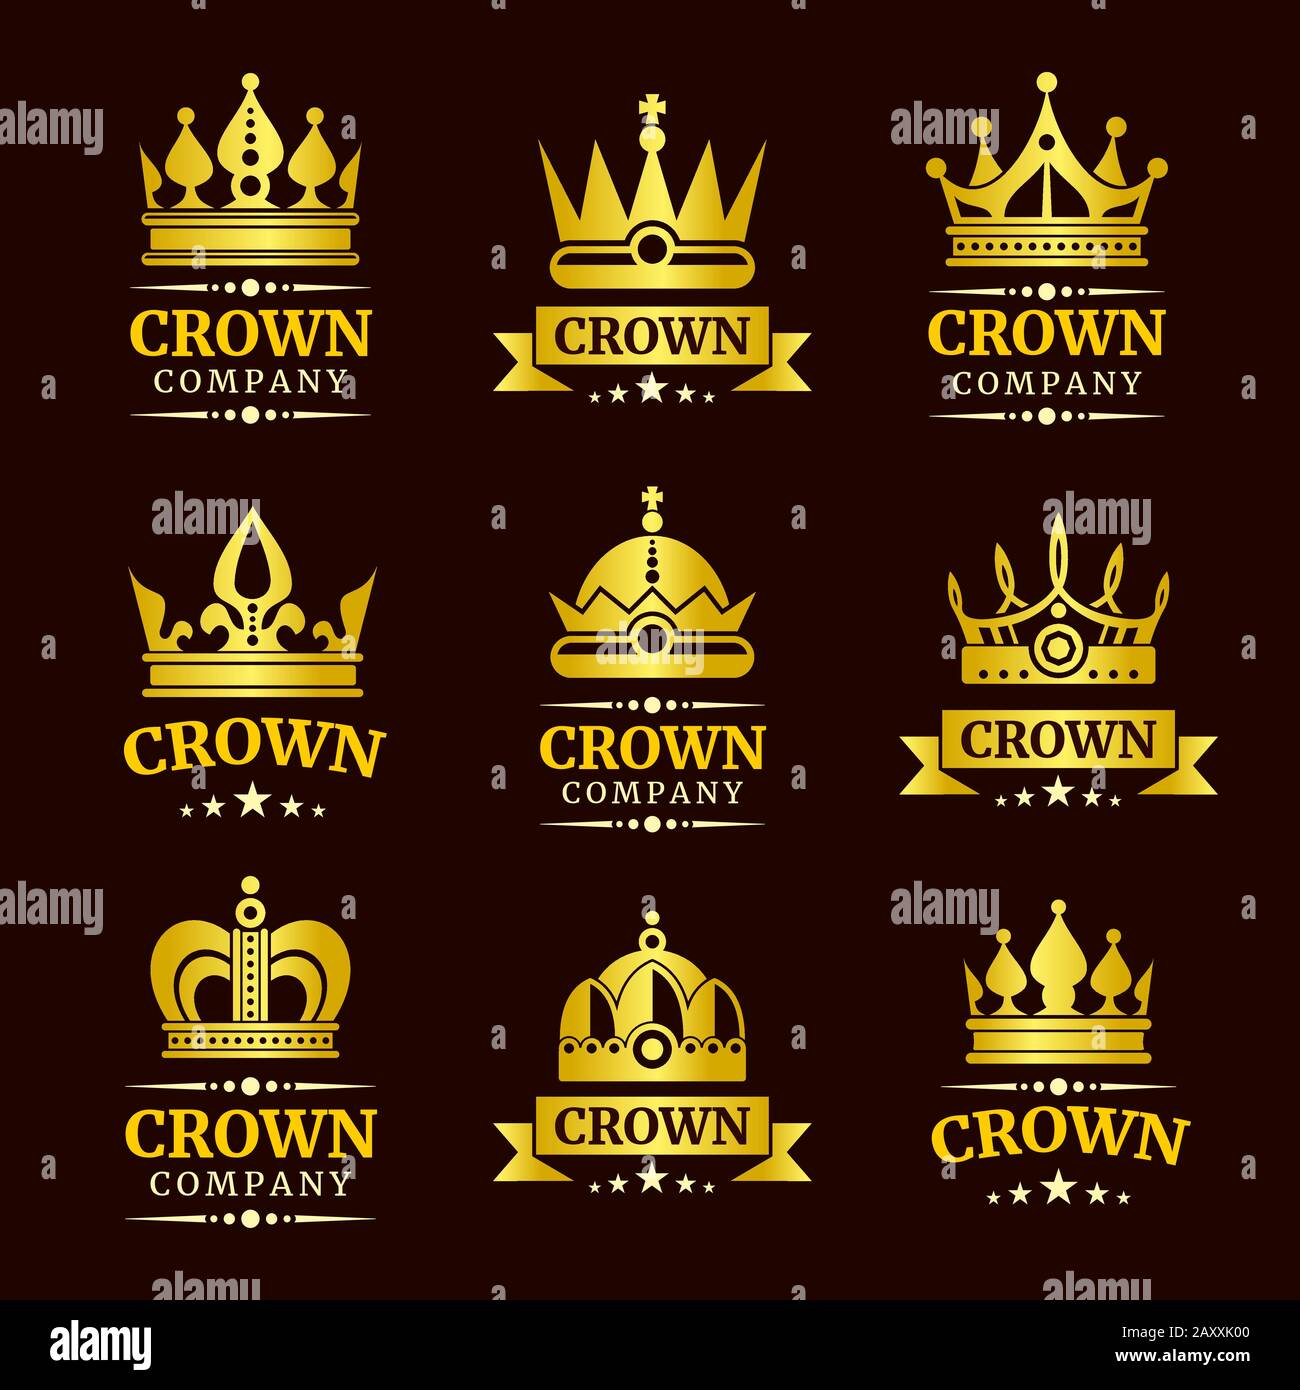 Luxury crown logo and crown monogram set. Gold crowns with text vector Stock Vector